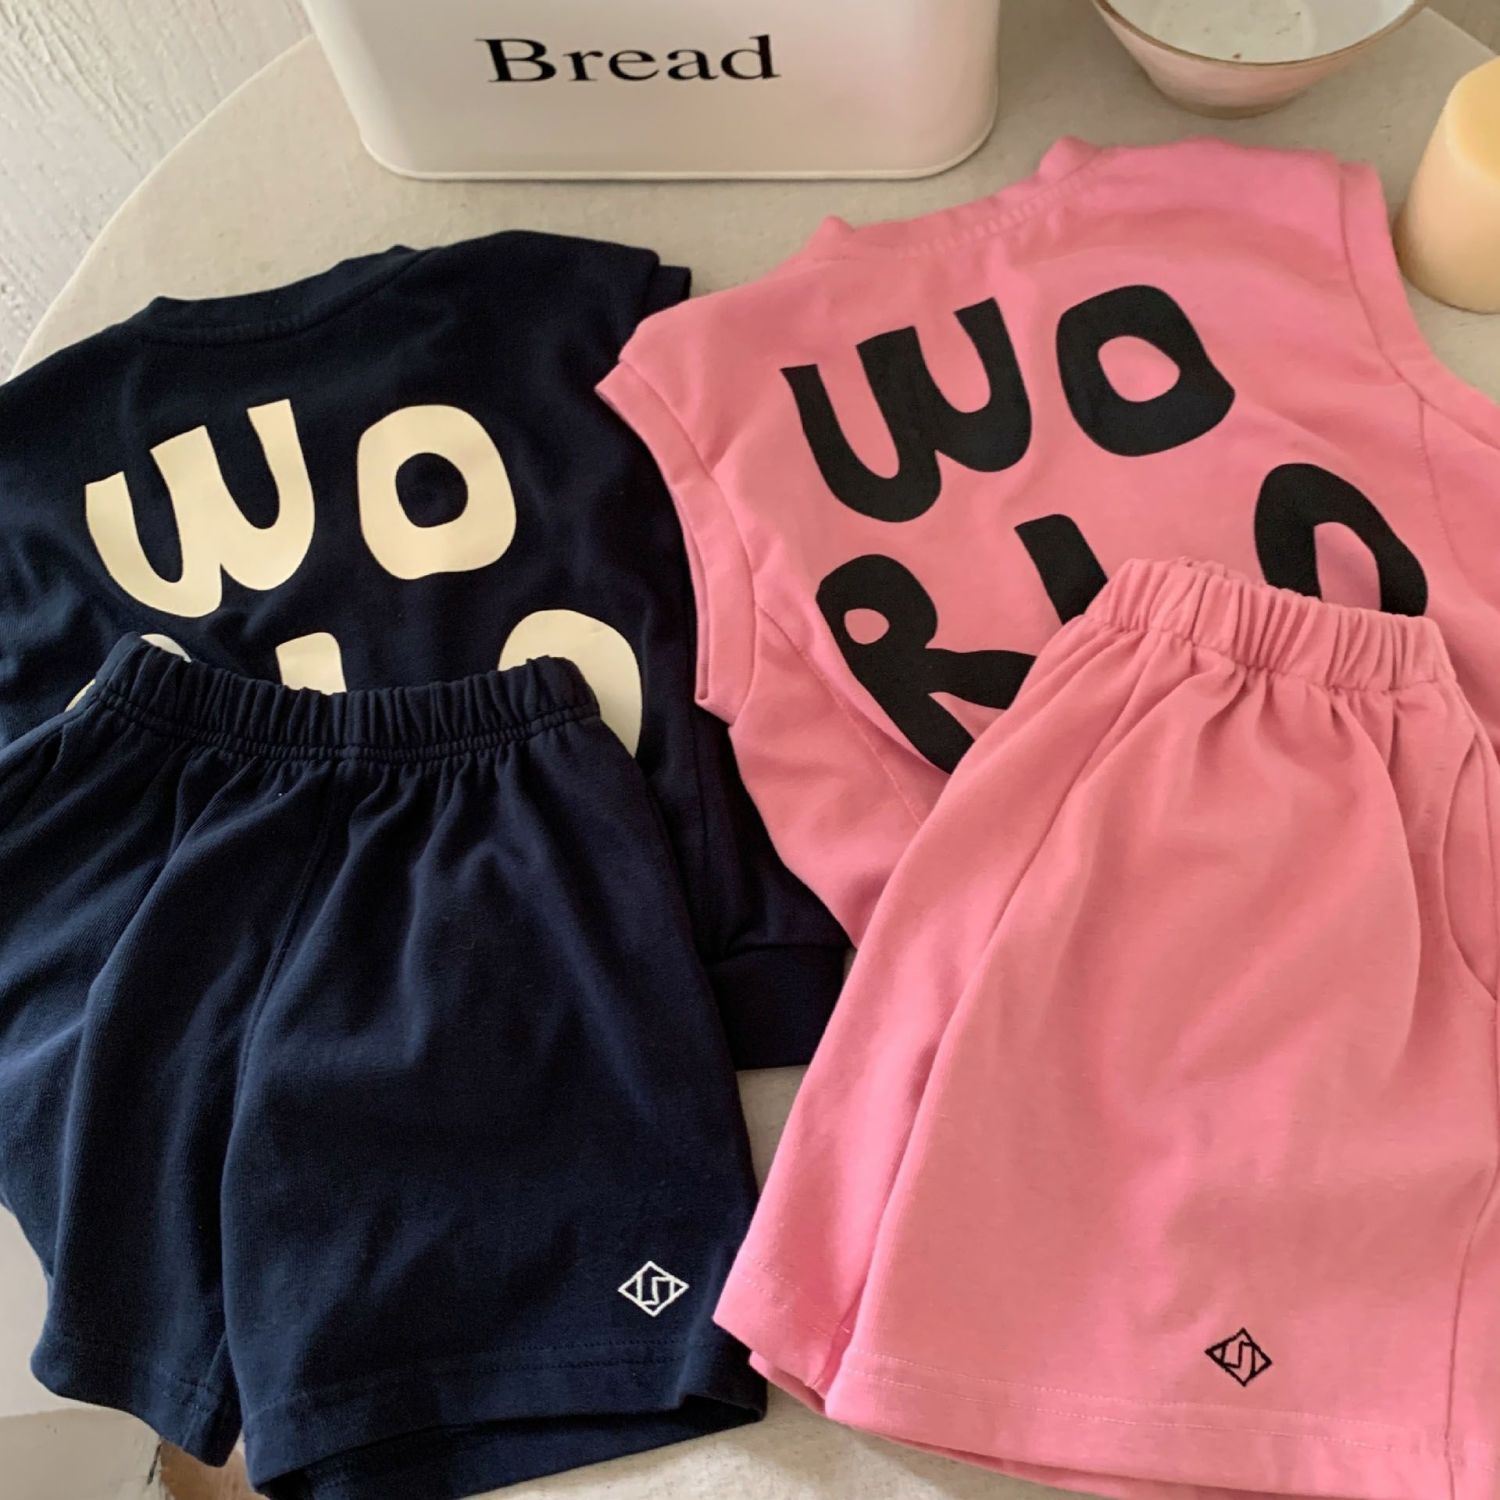 Summer new boys' suit children's Korean style casual loose solid color letter print sleeveless shorts sports suit